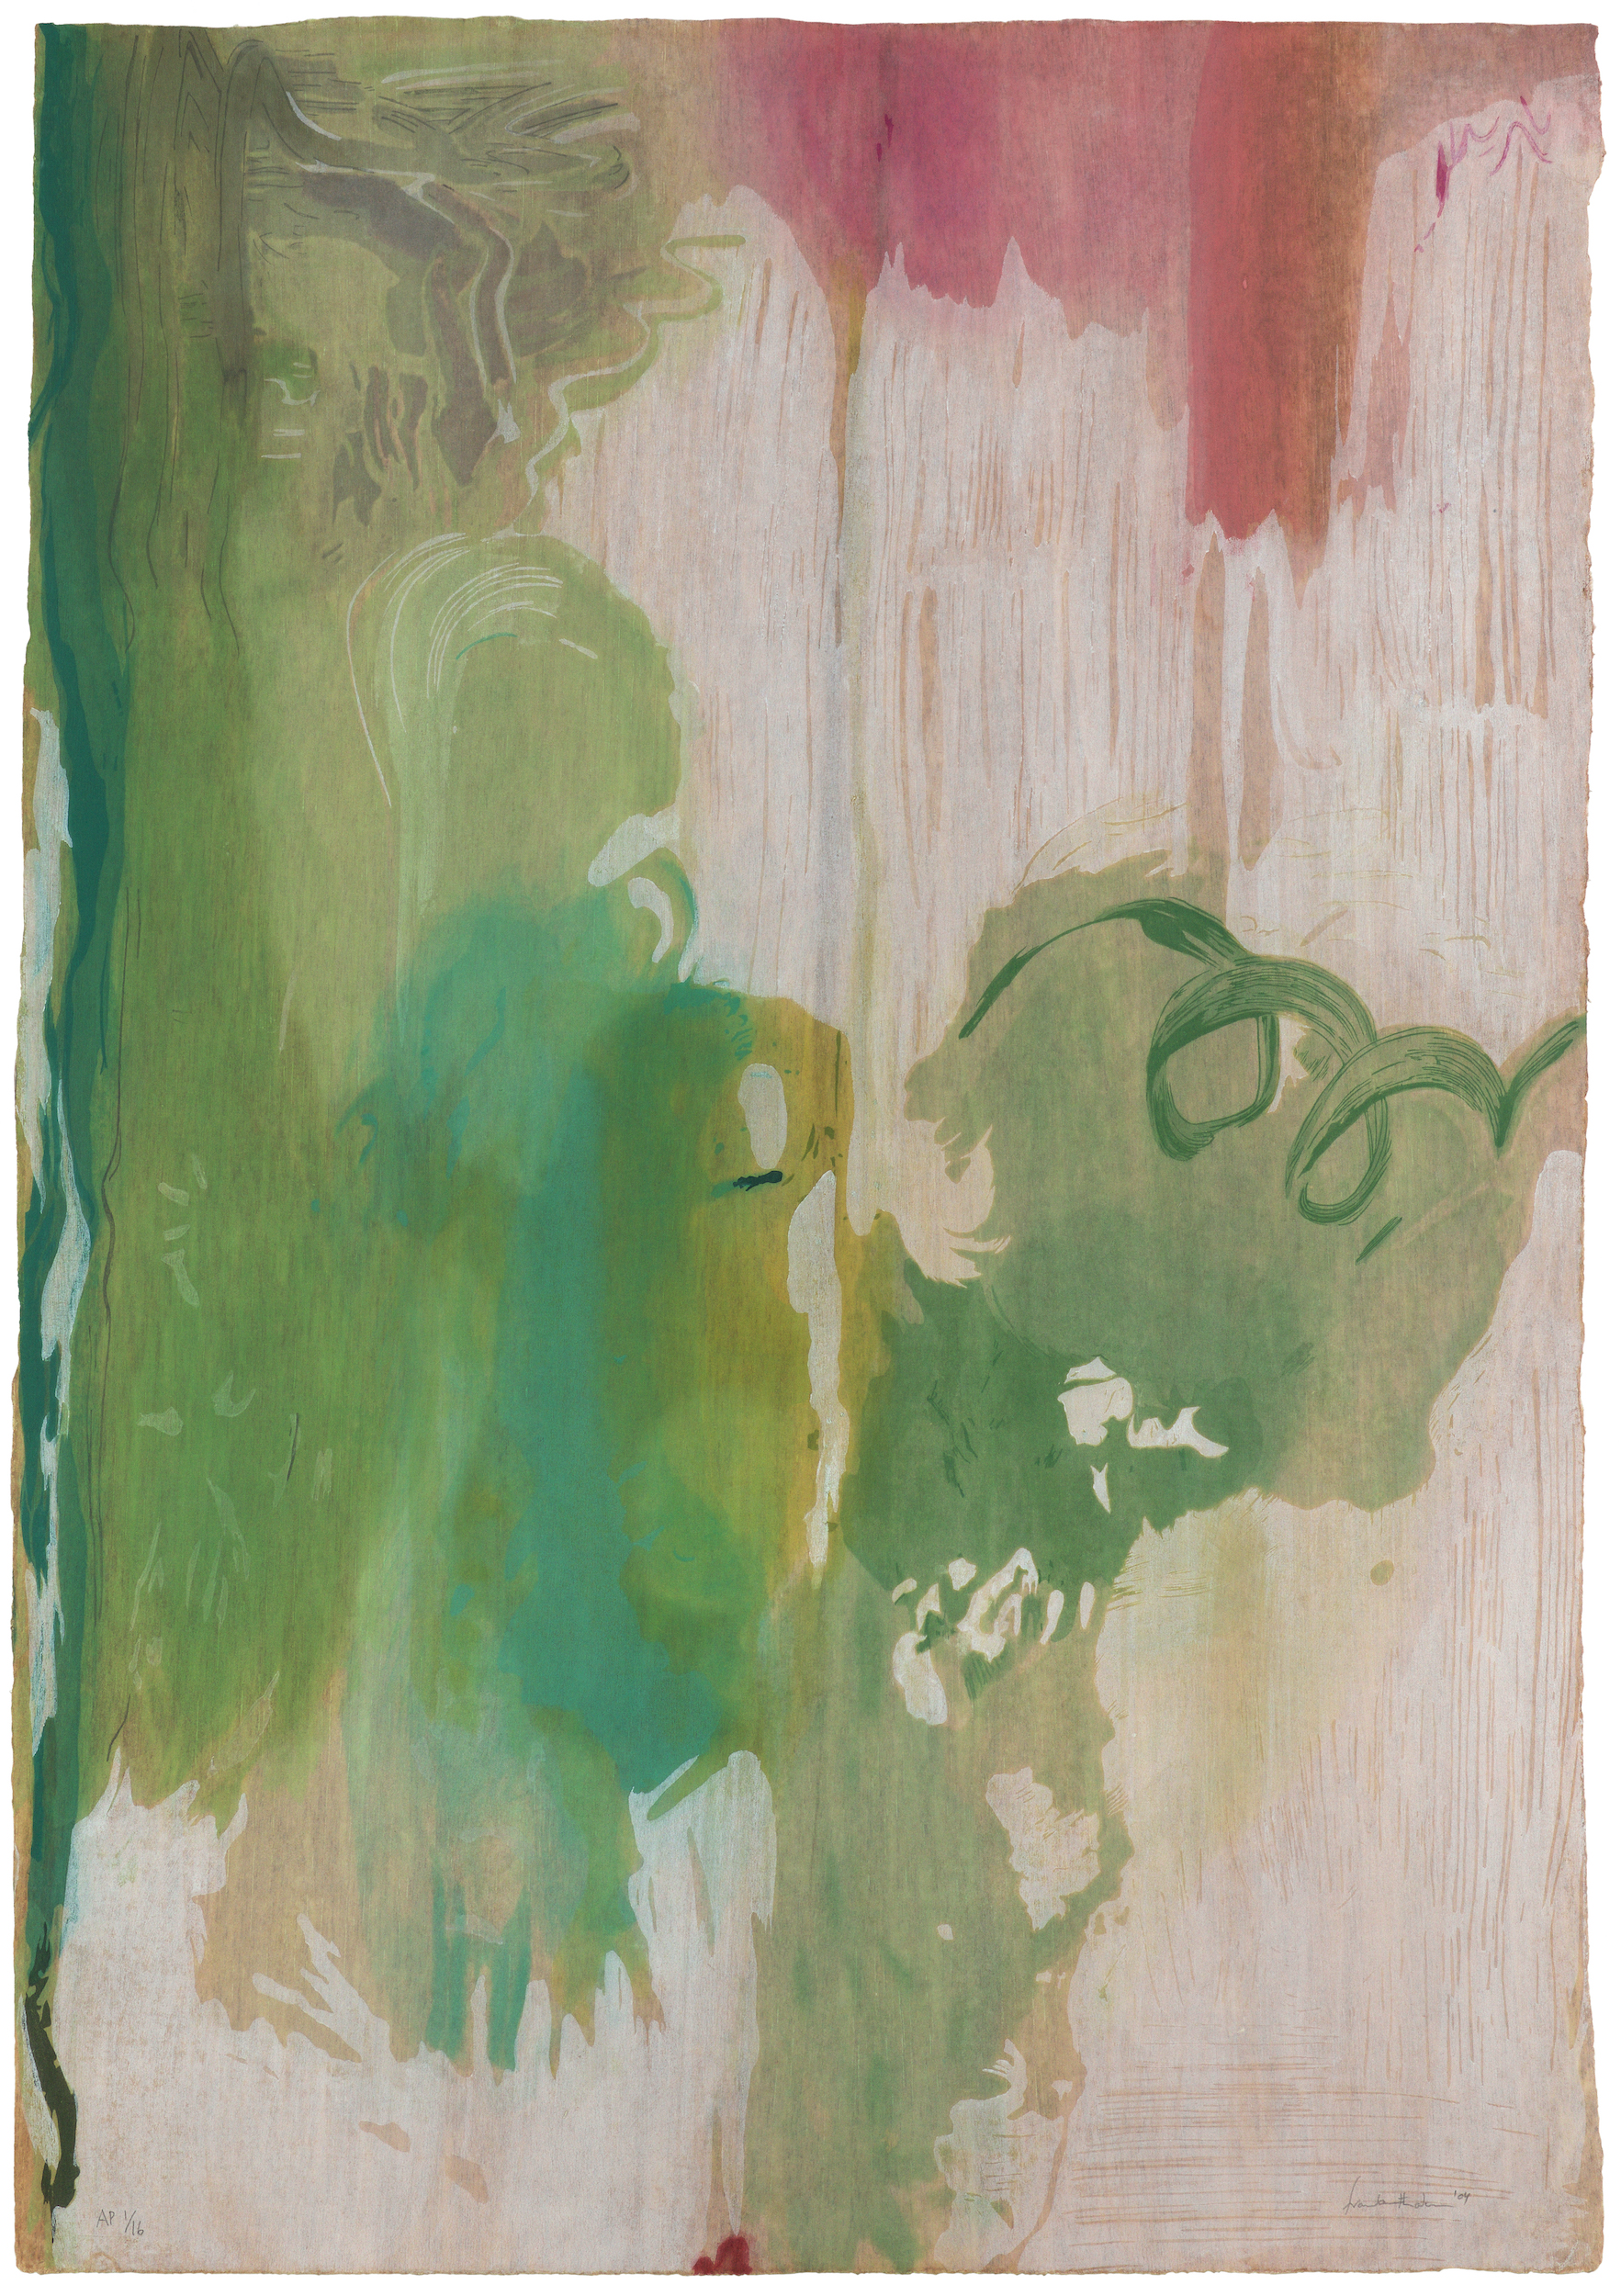 Snow Pines by Helen Frankenthaler - 2004 - 95.3 x 66 cm Dulwich Picture Gallery